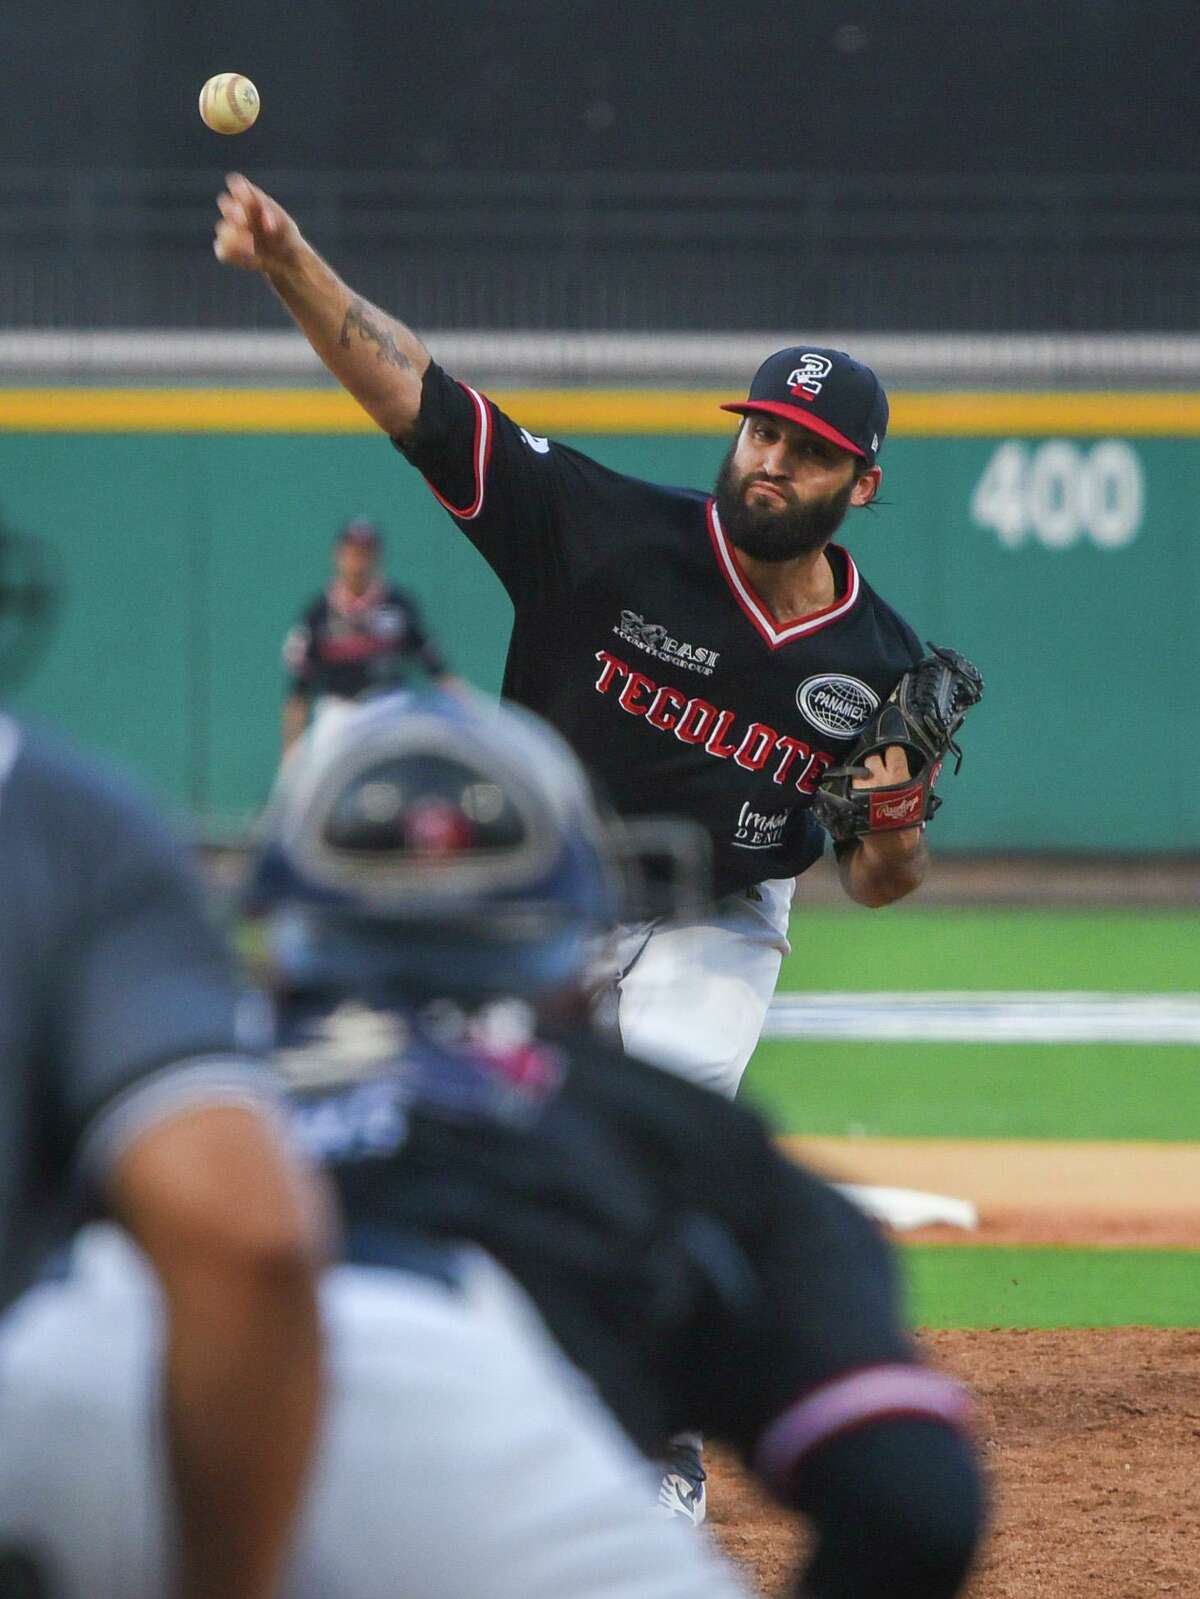 Tecolotes pitcher Kenneth Sigman, who manager Alfonso “Houston” Jimenez said was dealing with a minor shoulder issue, was out for just under a month as he was placed on the reserve list June 19.